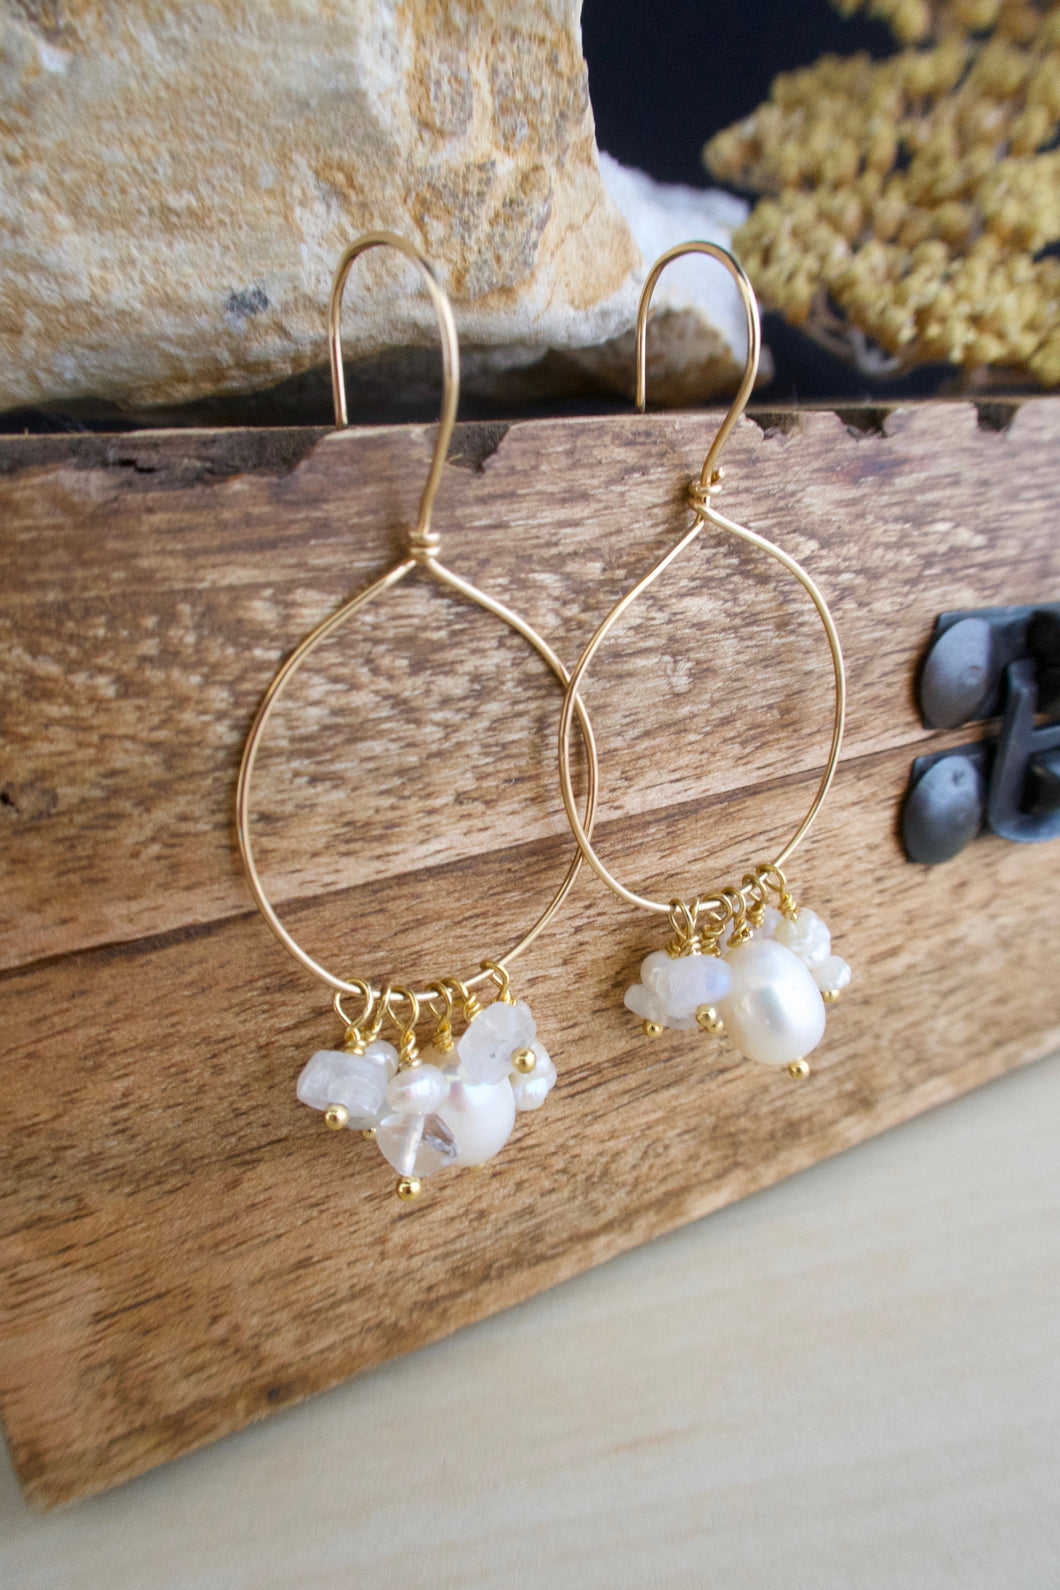 Gold Fill Hoops with White Pearl and Gemstone Dangles